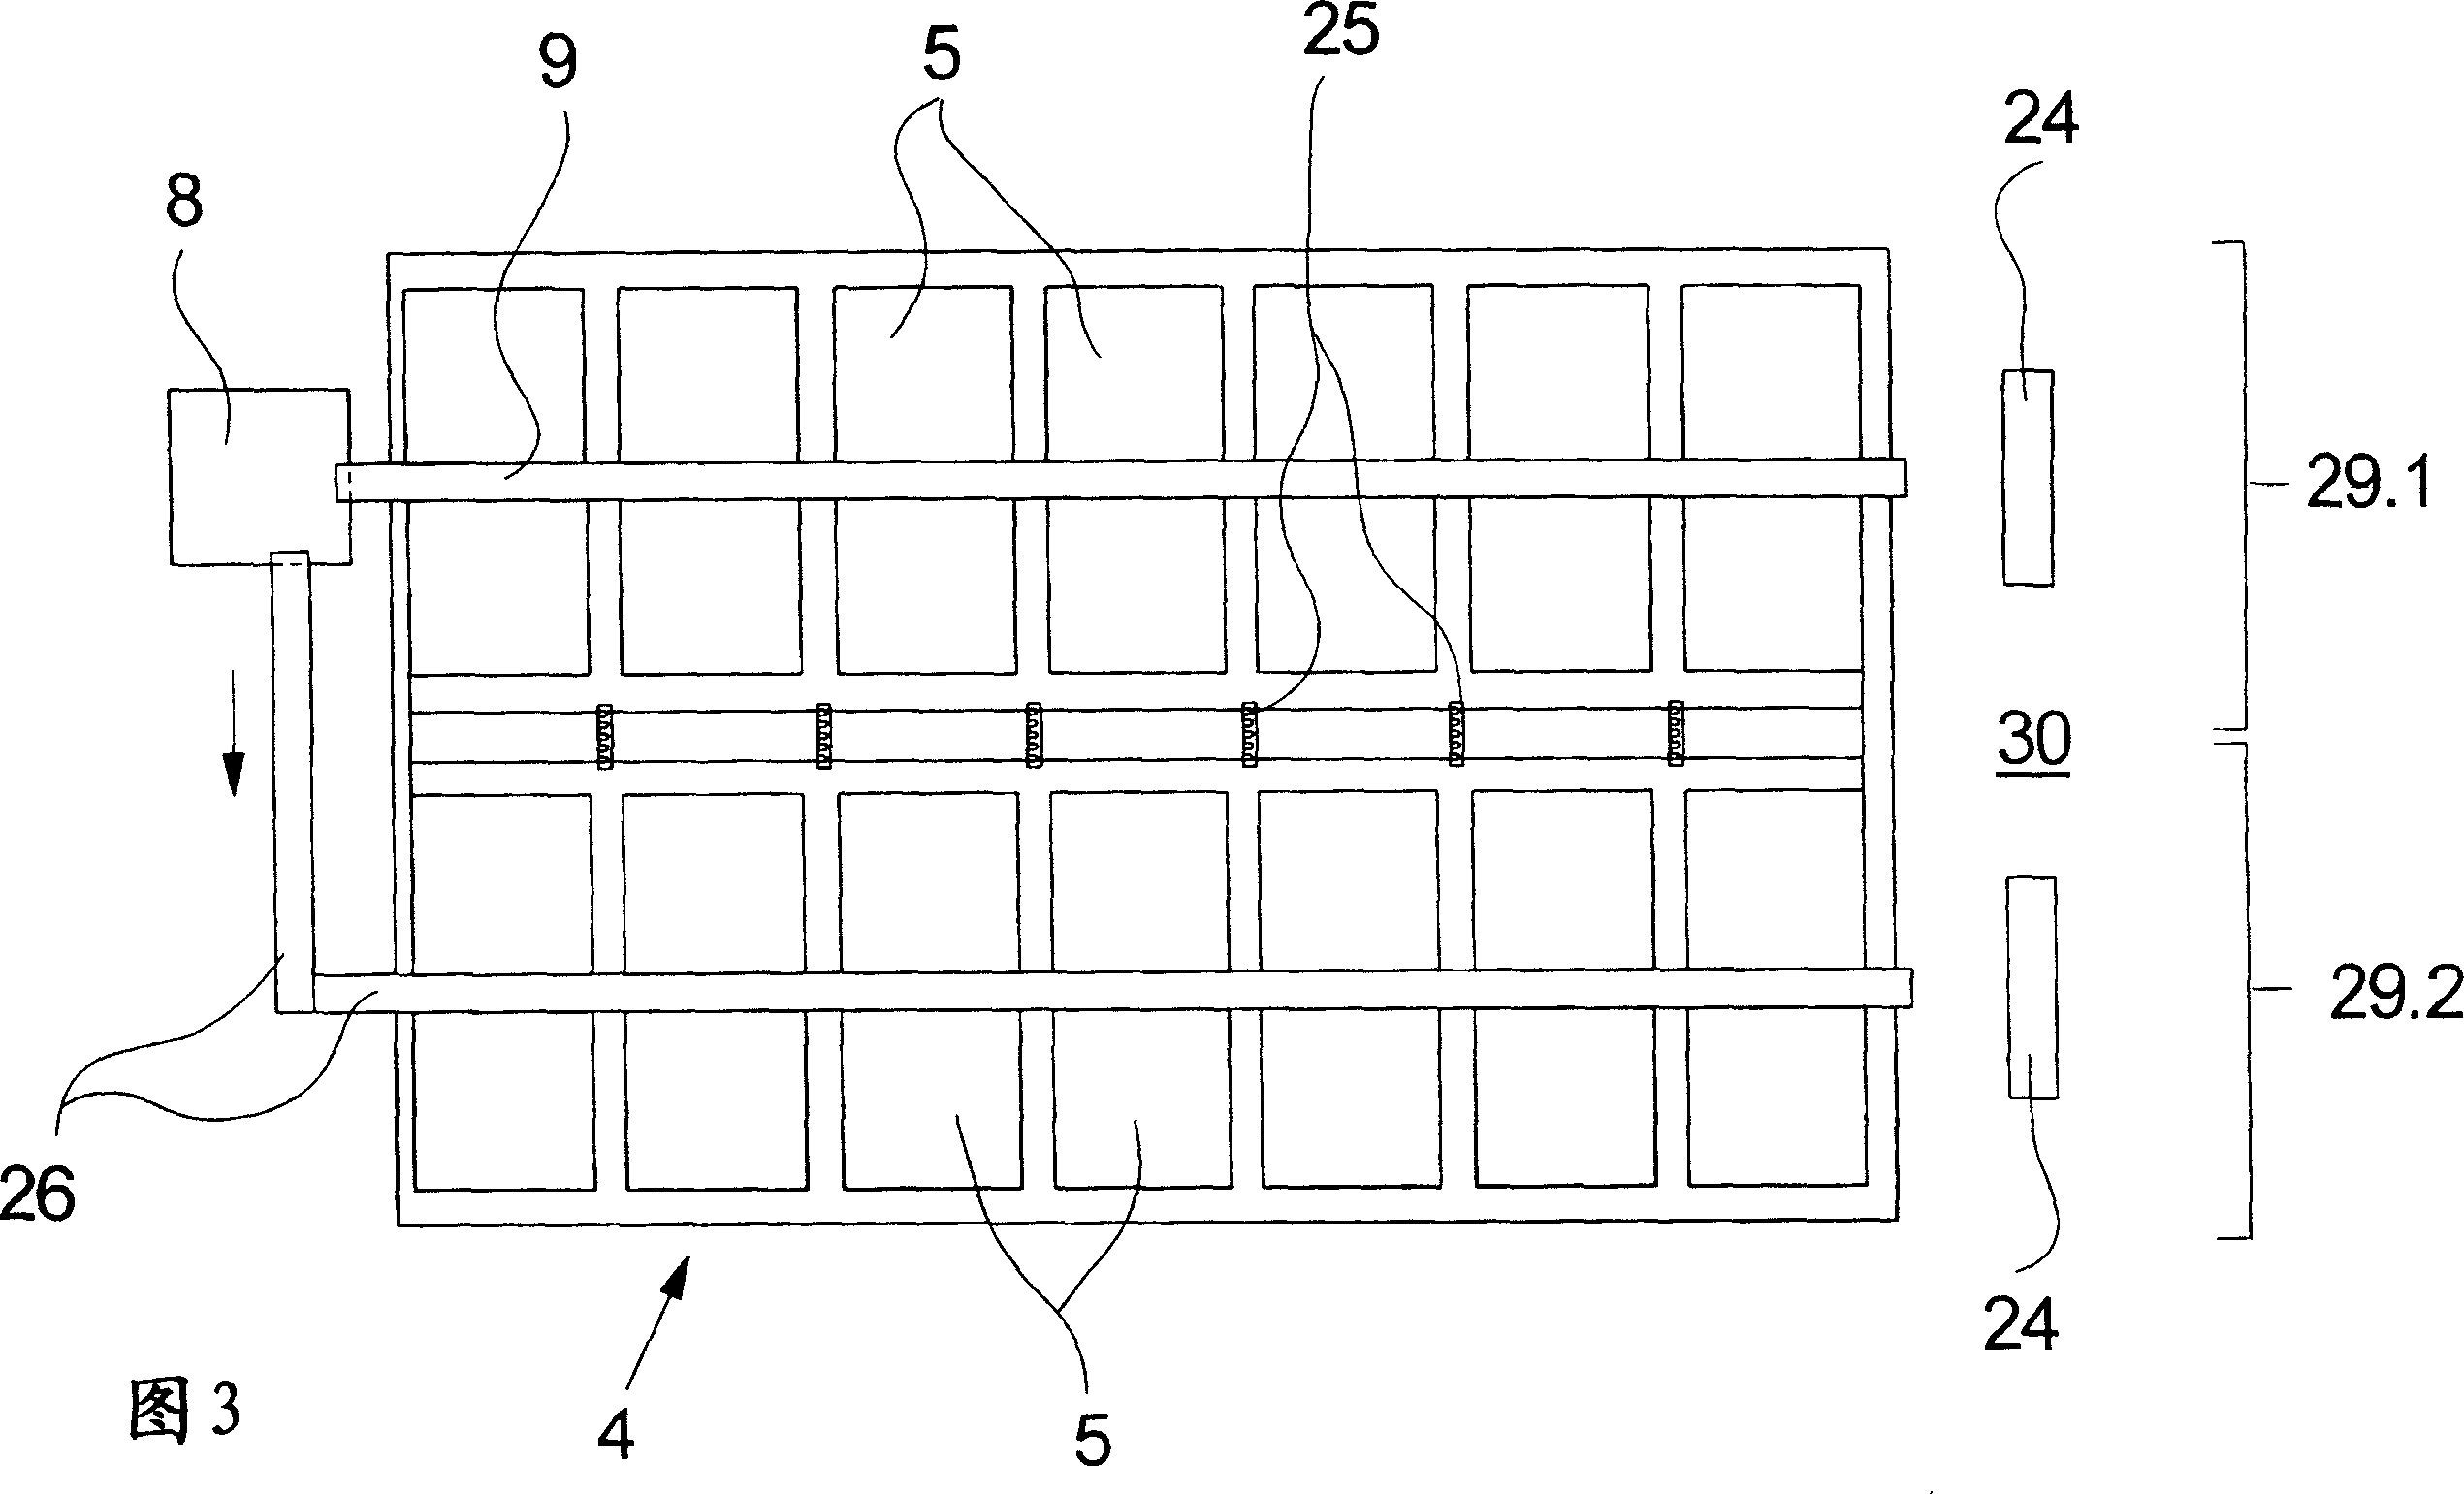 Method and device for producing and storing tows